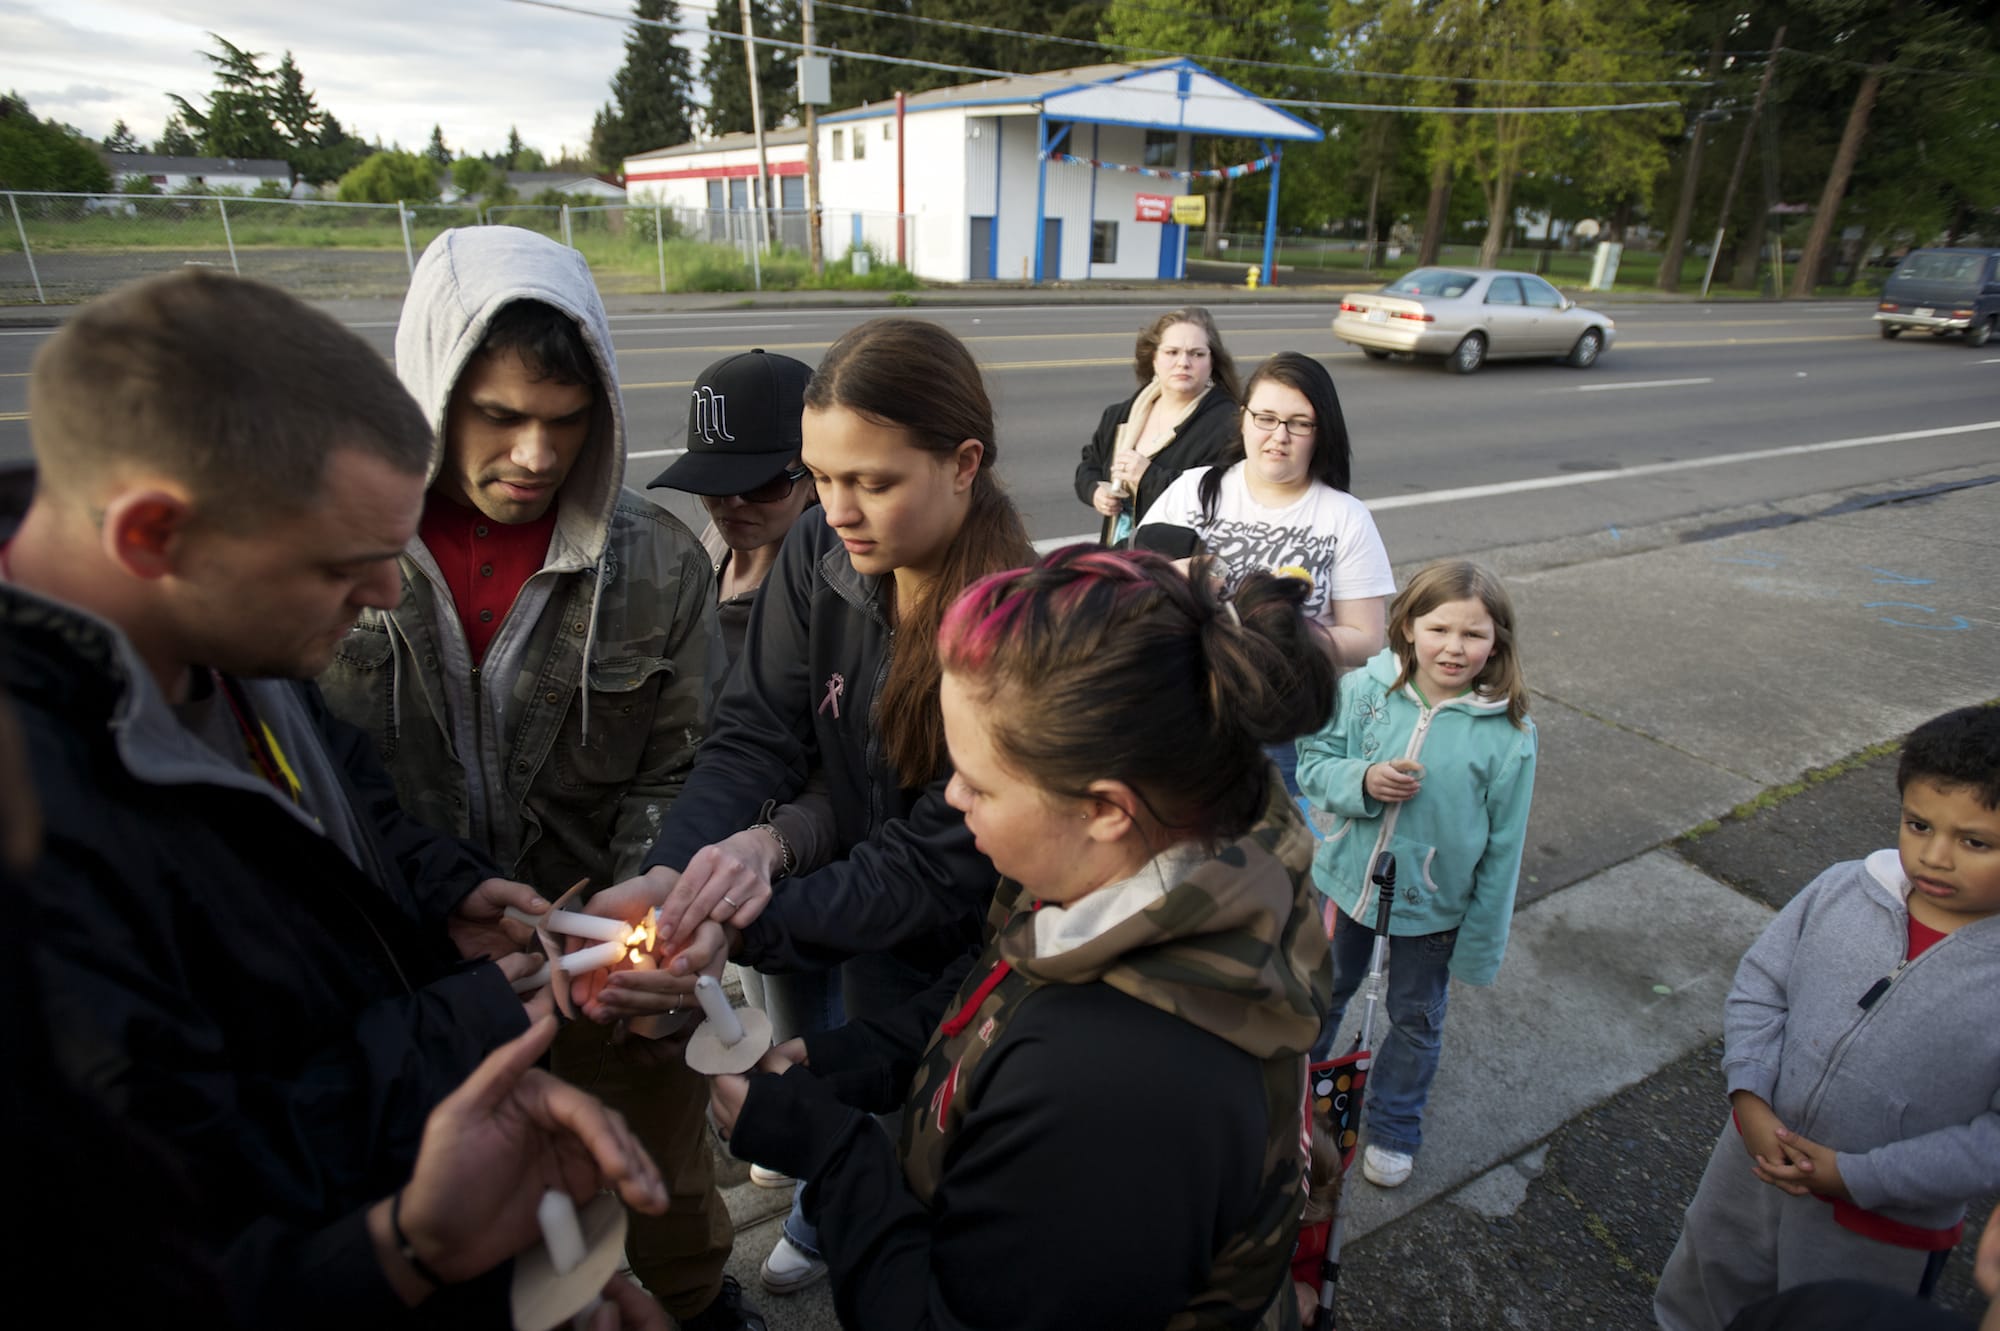 Steven Lane/The Columbian
Neighbors who witnessed the hit-and-run that killed  Maria Delos-Carrasco Angulo light candles in her memory Friday night in Vancouver. Angulo died Thursday night after being struck by a car as she crossed Fourth Plain Boulevard in a crosswalk.